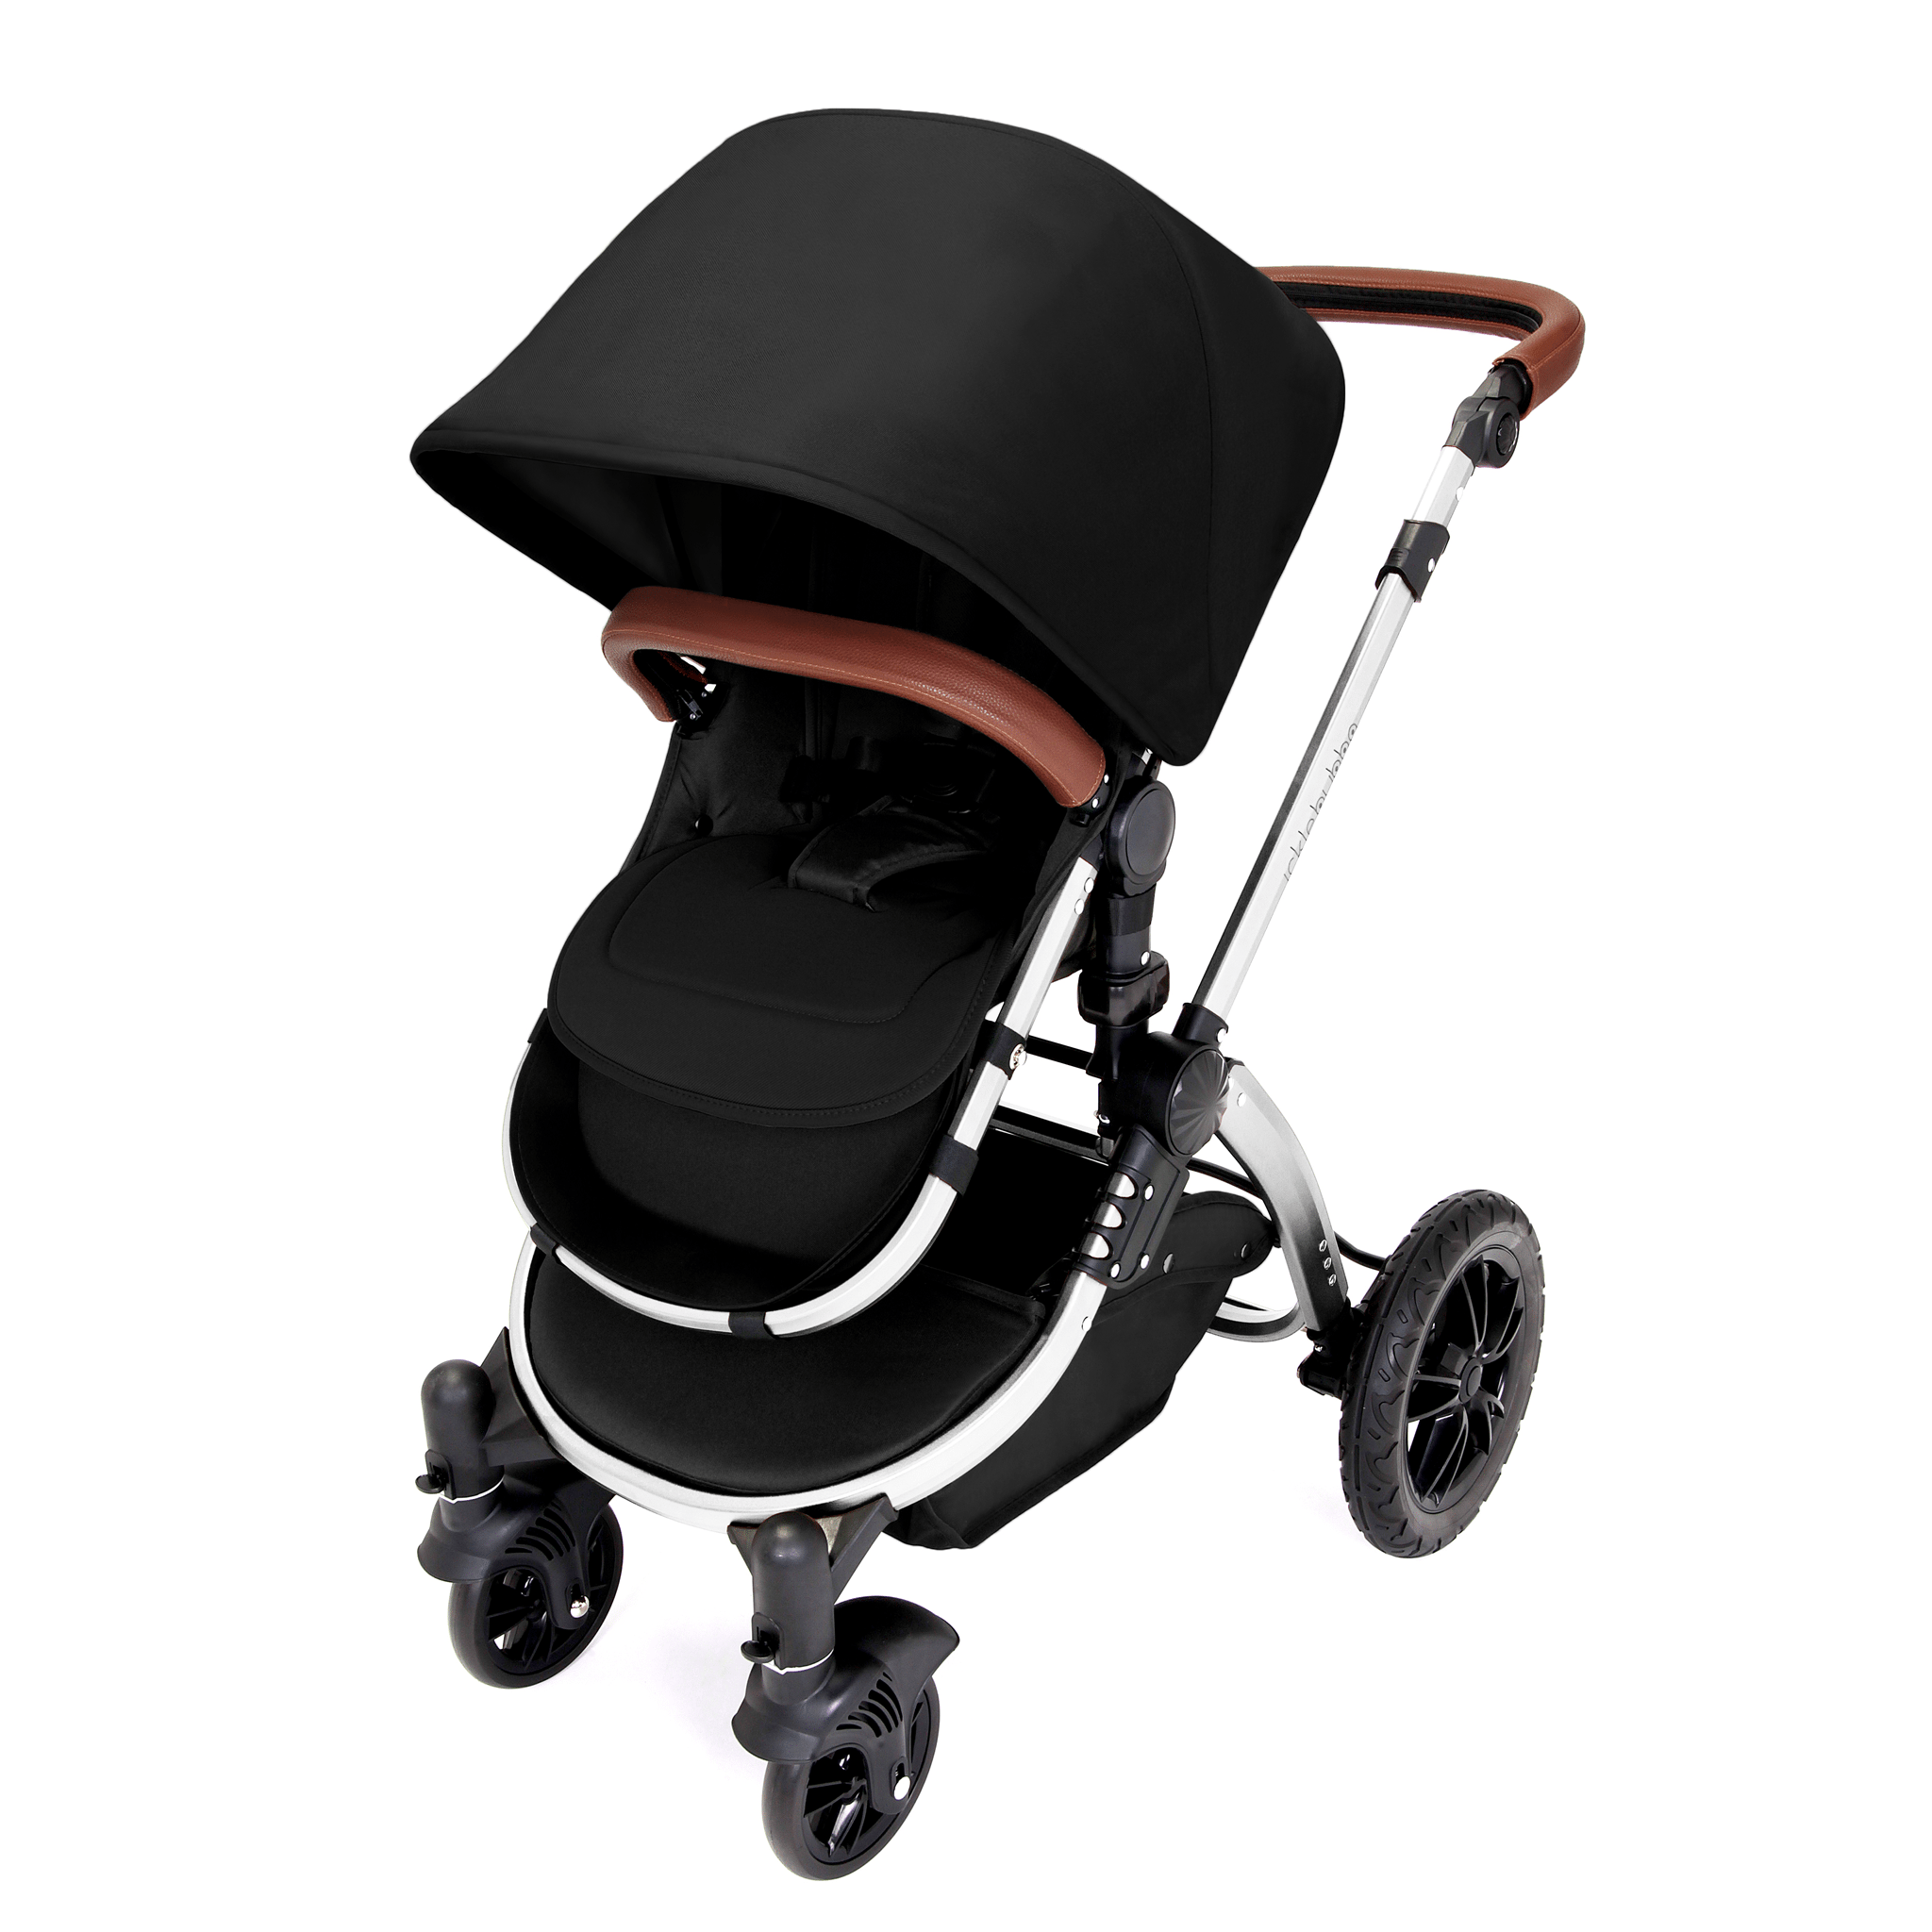 Ickle Bubba baby pushchairs Ickle Bubba Stomp V4 2-in-1 Pushchair Chrome/Midnight 10-004-000-027